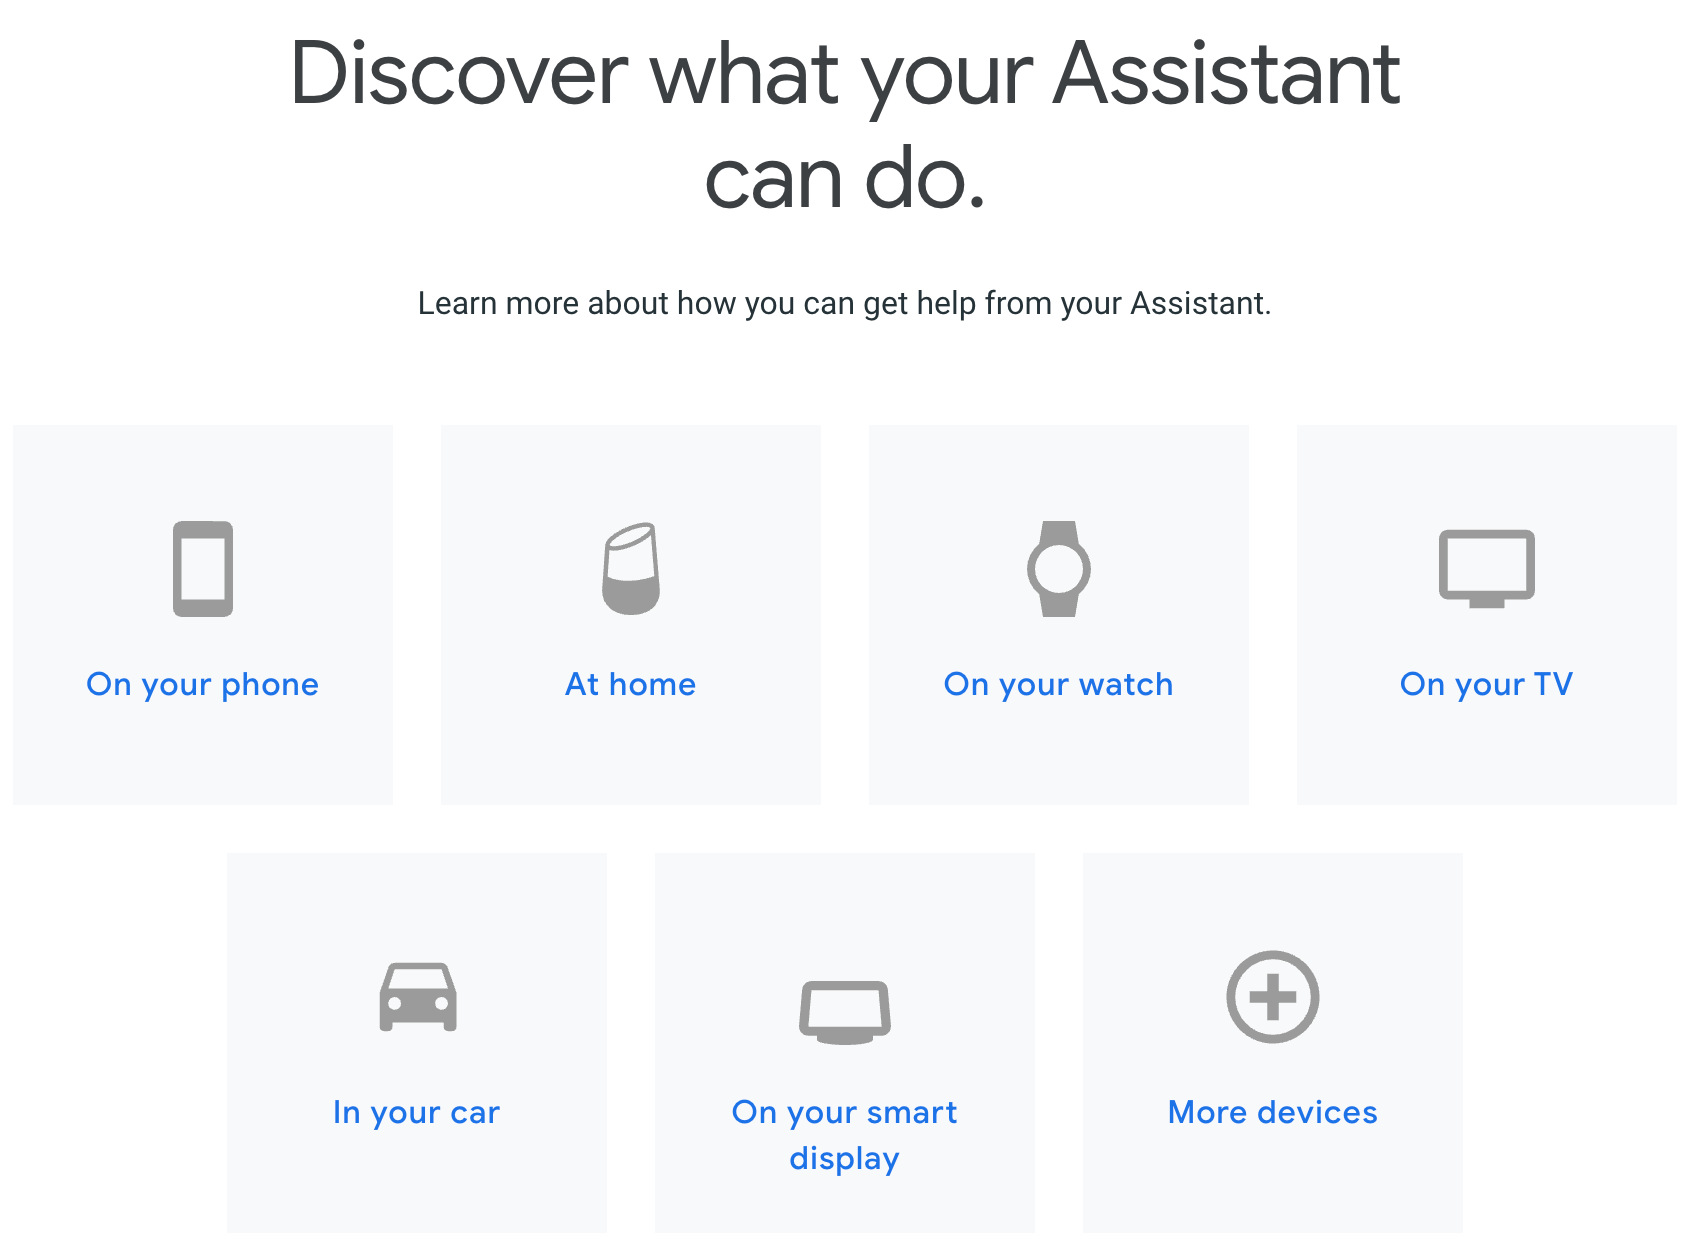 Google's Assistant use cases